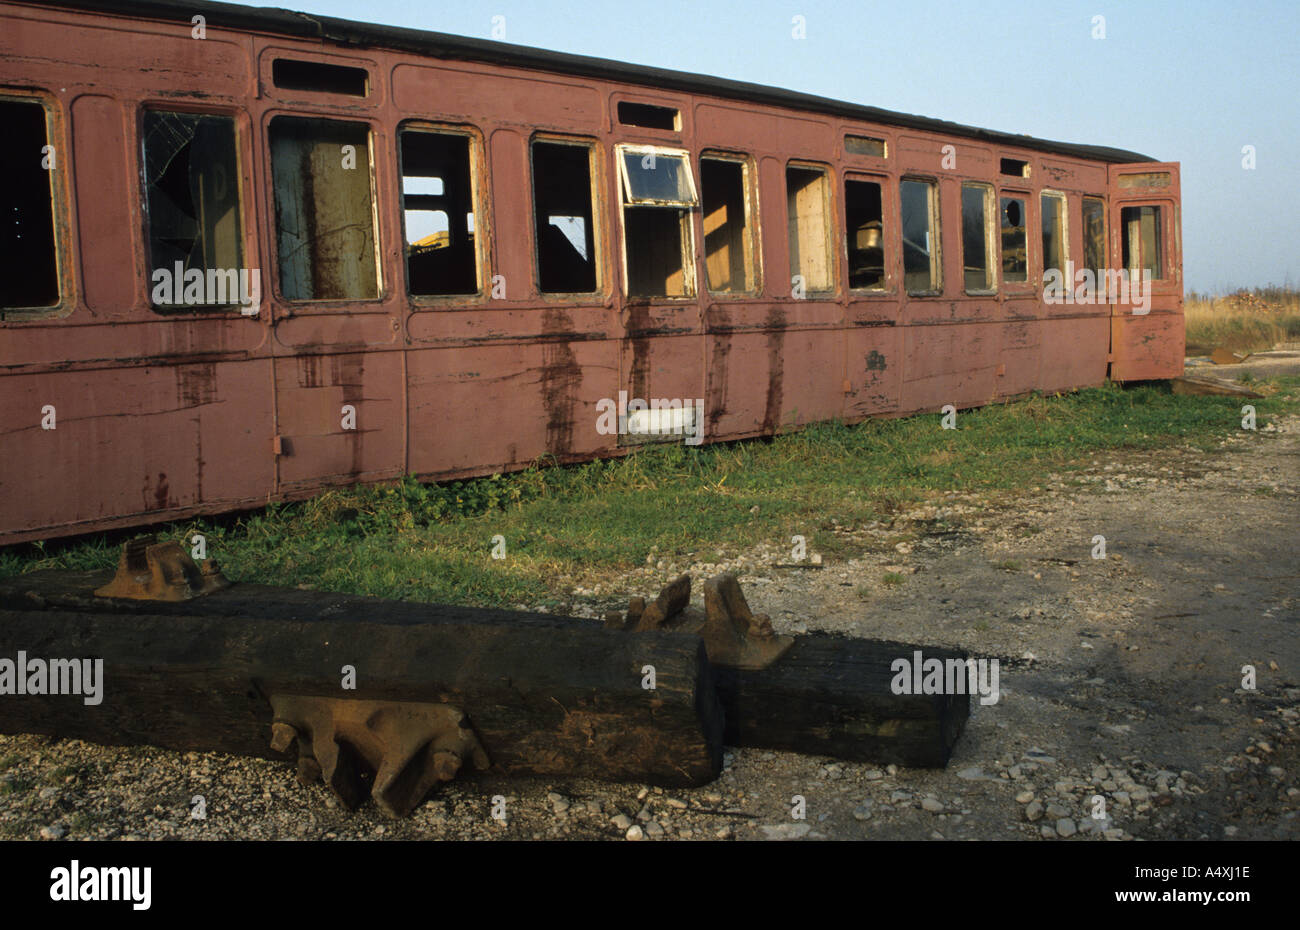 Disused Railway Carriage And Sleepers Stock Photo